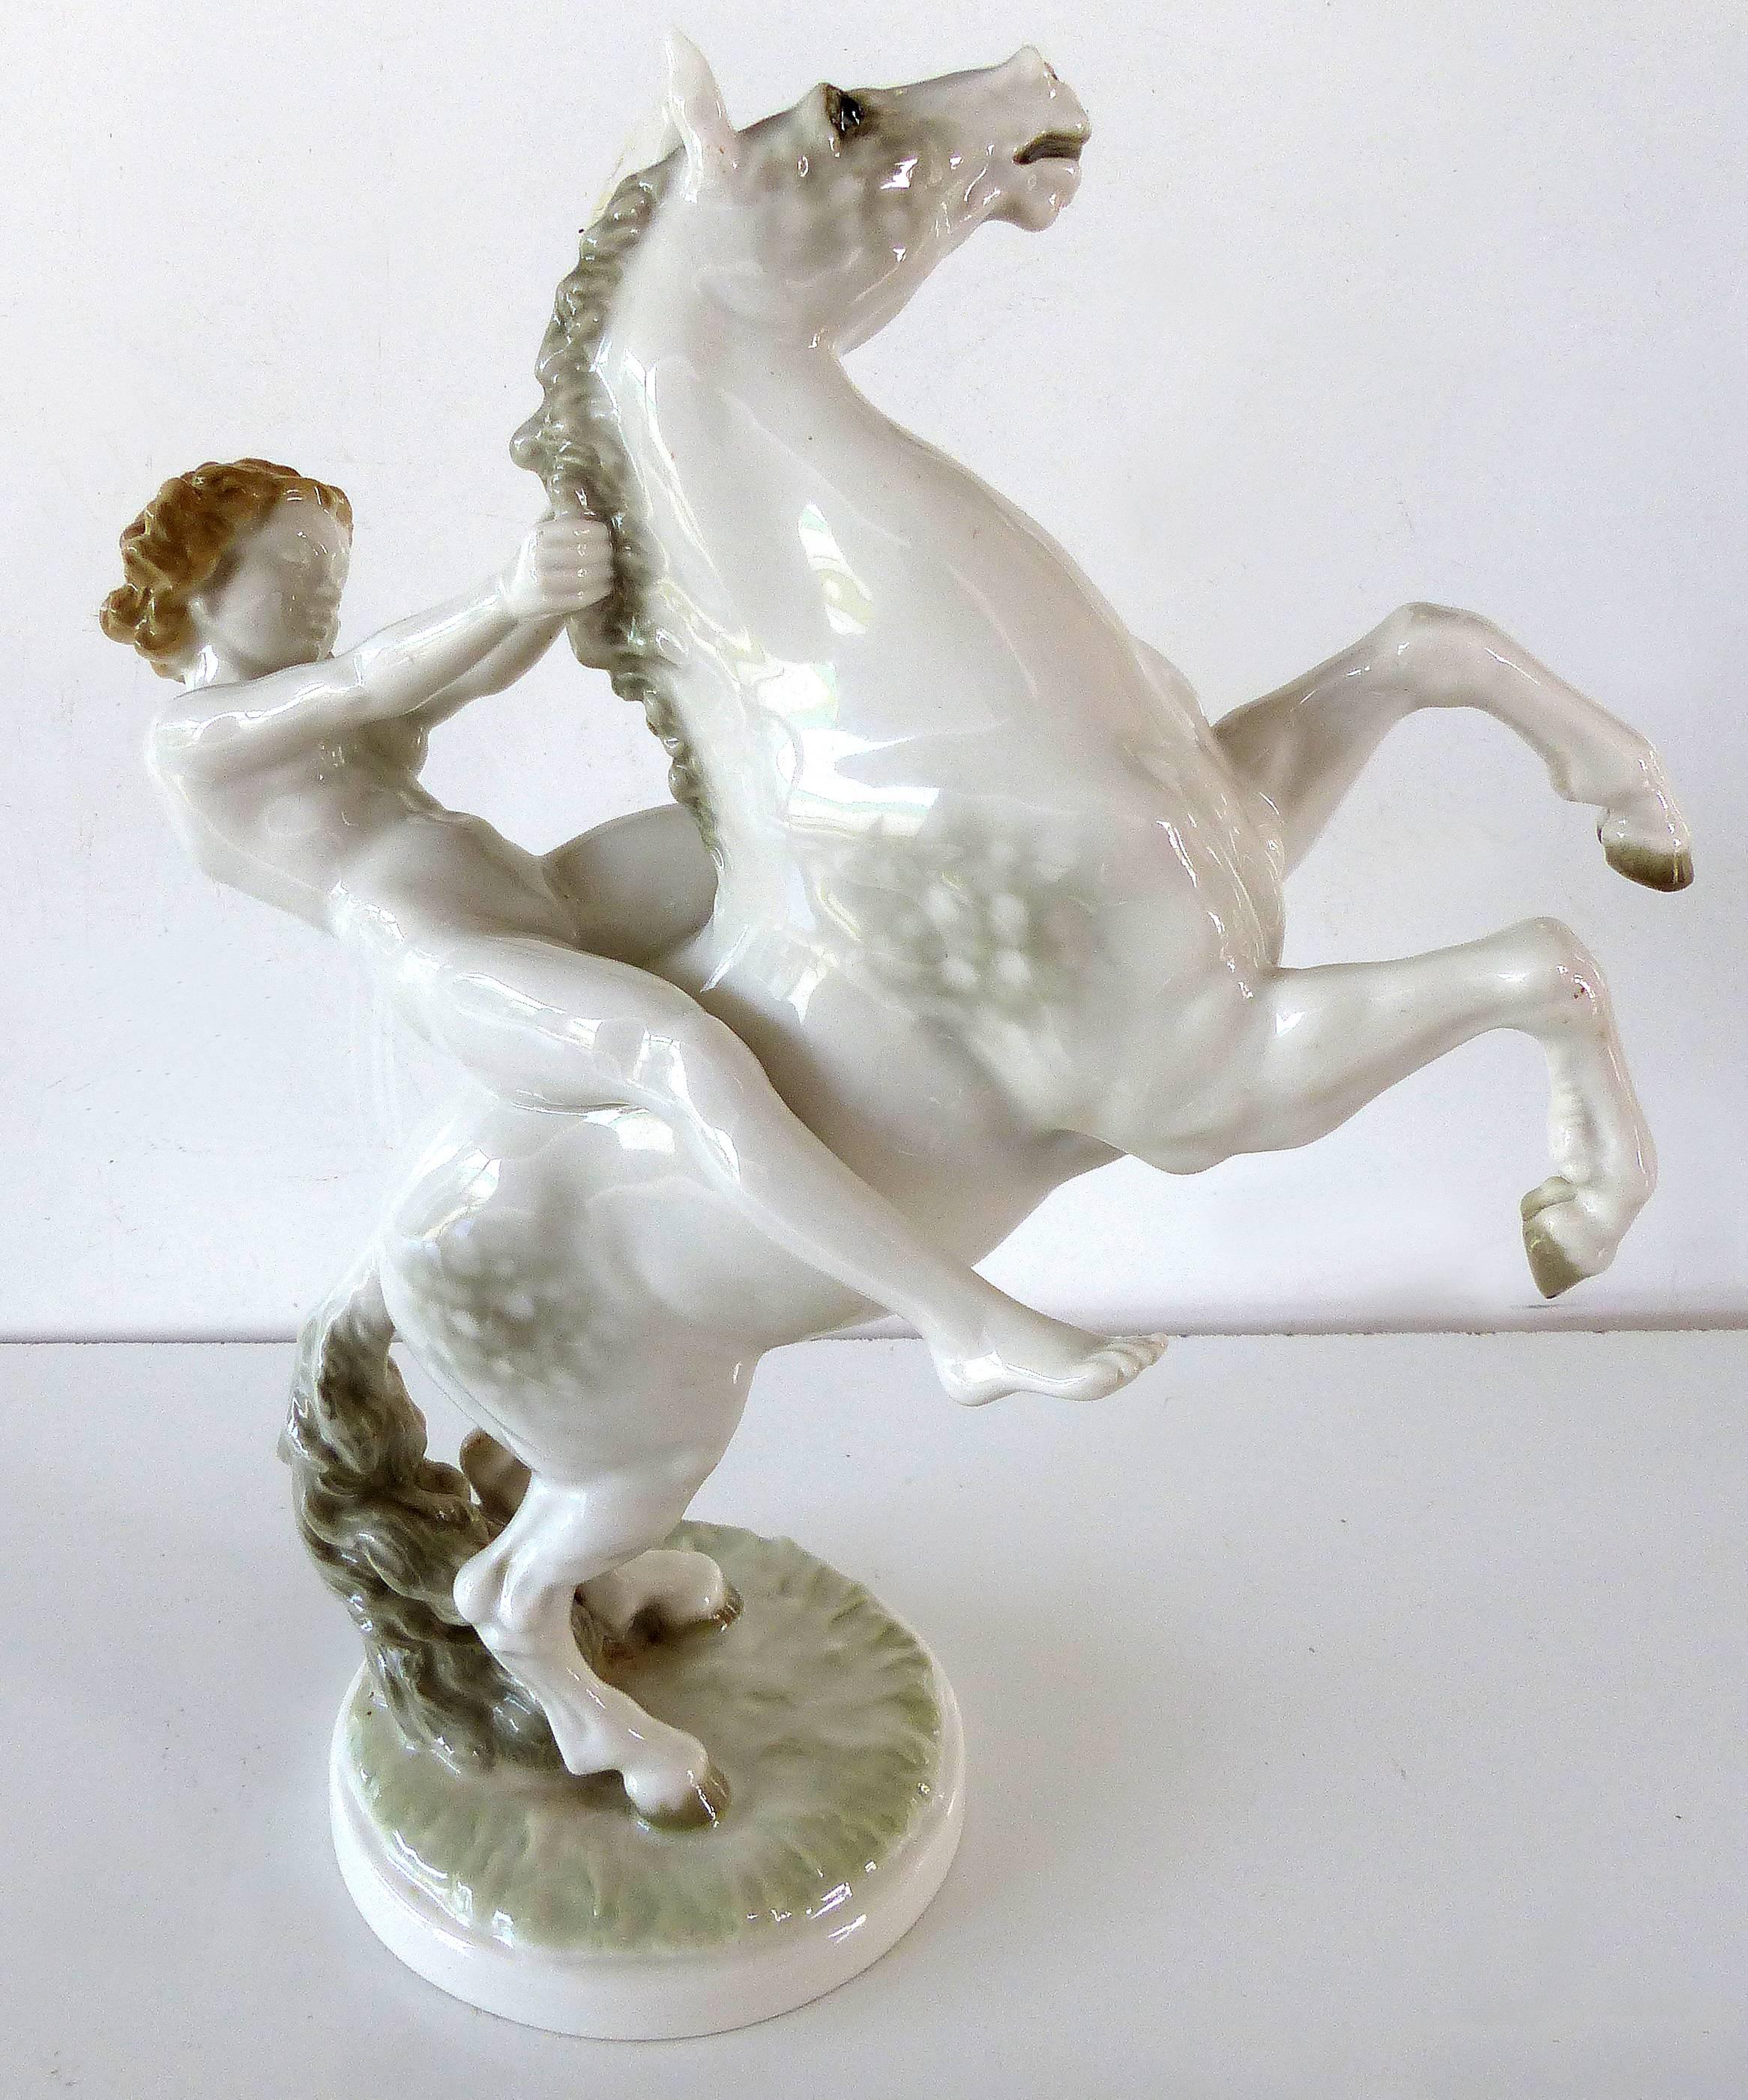 Hutschenreuther Germany Porcelain Rearing Horse and Rider

Offered for sale is a circa 1940s Hutschenreuther Germany porcelain statuette of a nude on a rearing horse by K. Tutter. The base retains the original paper sticker which reads 8813/2F.